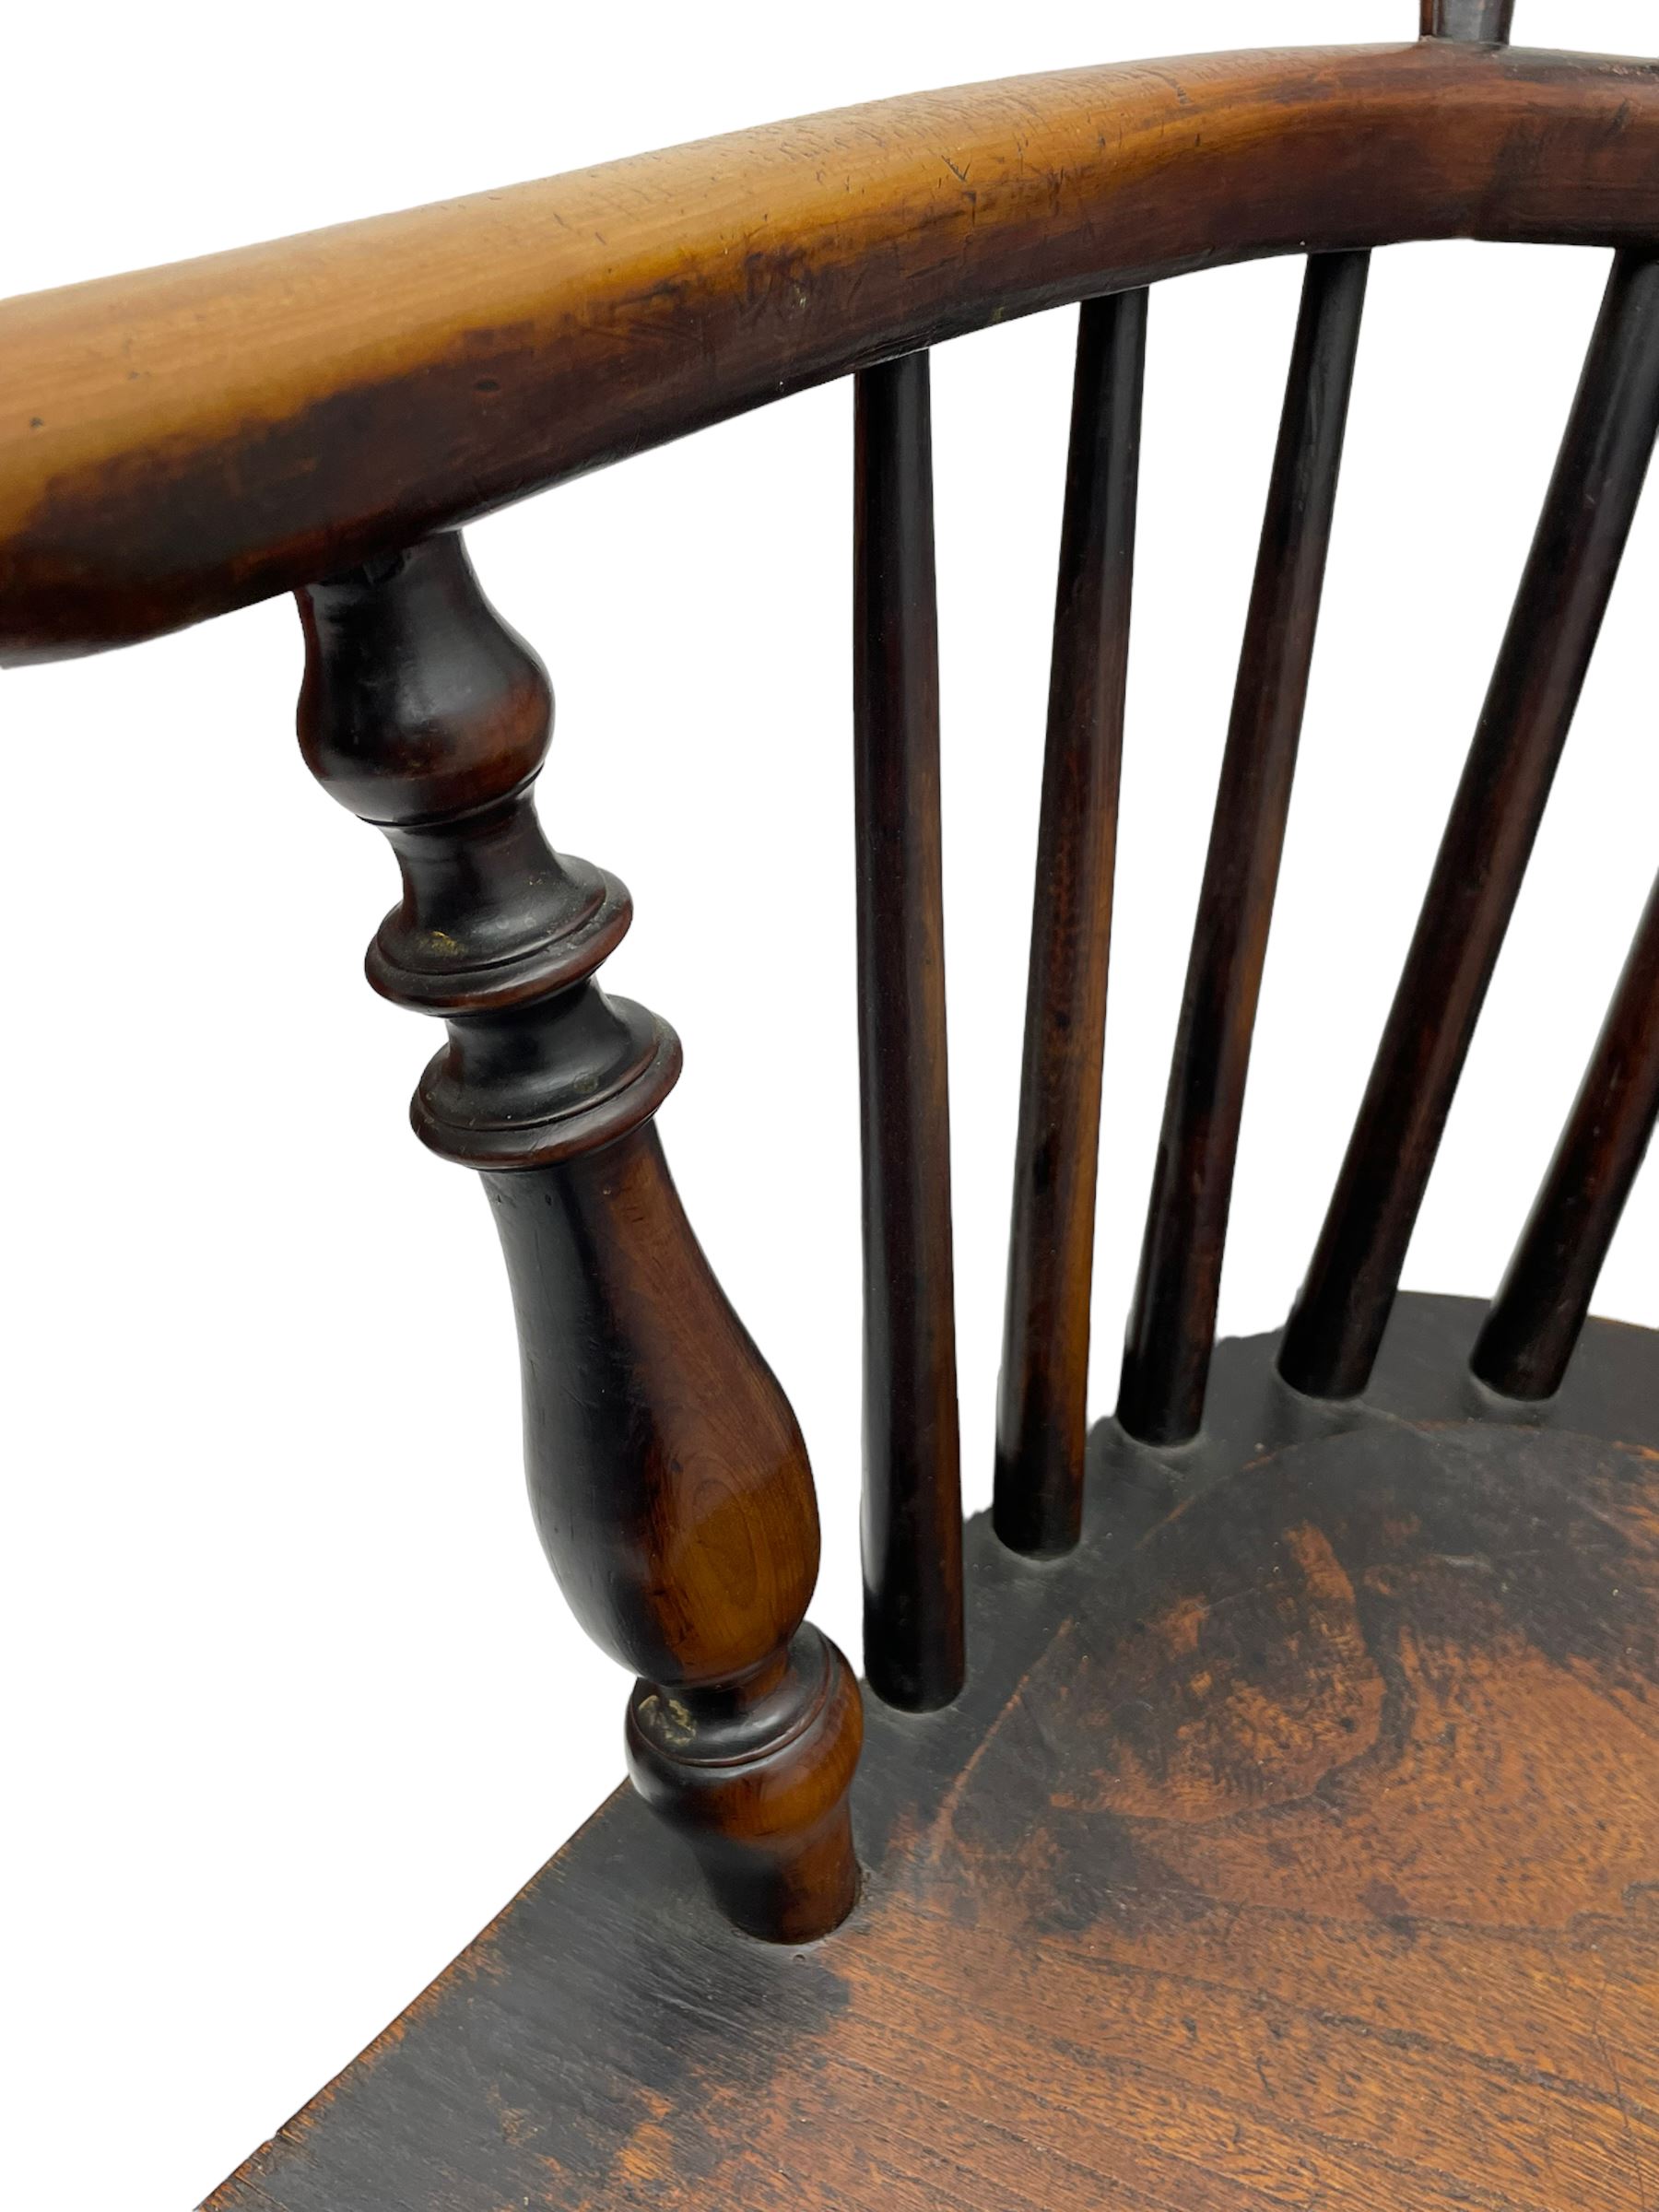 19th century yew wood and elm Windsor chair - Image 7 of 9